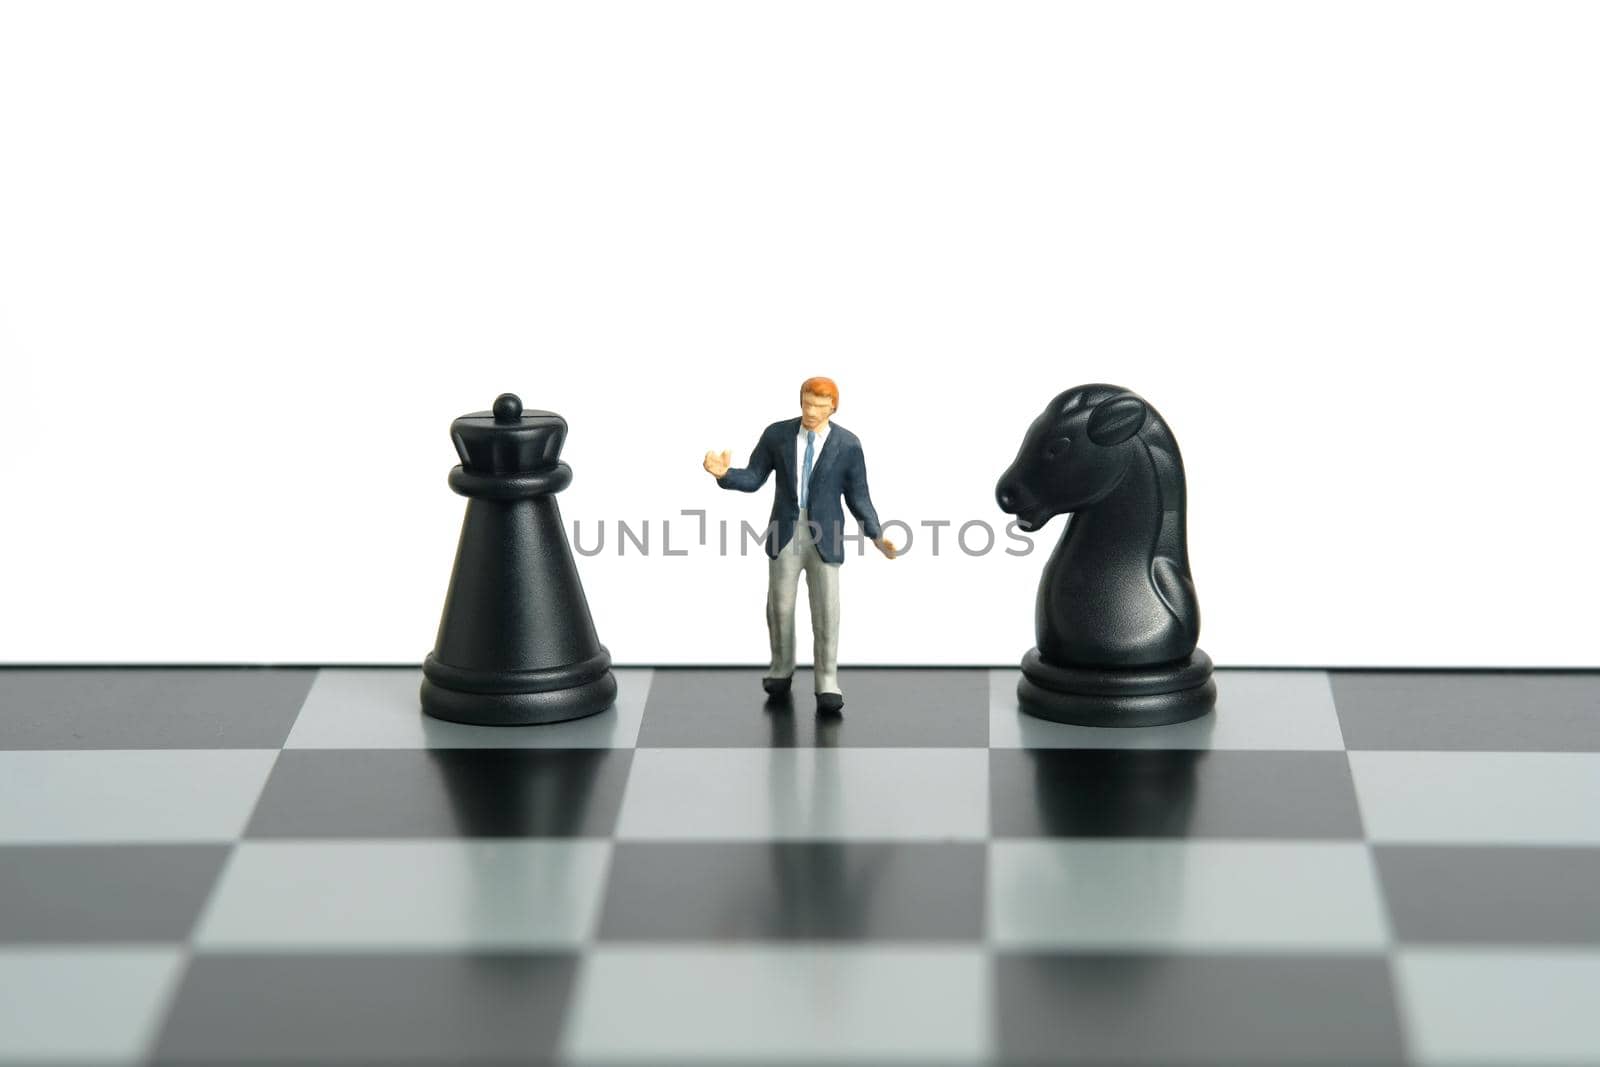 Miniature people toy figure photography. Attack or defense strategy decision concept. A shrugging businessman stand above chessboard with black horse and castle knight pawn. Isolated on white background. Image photo